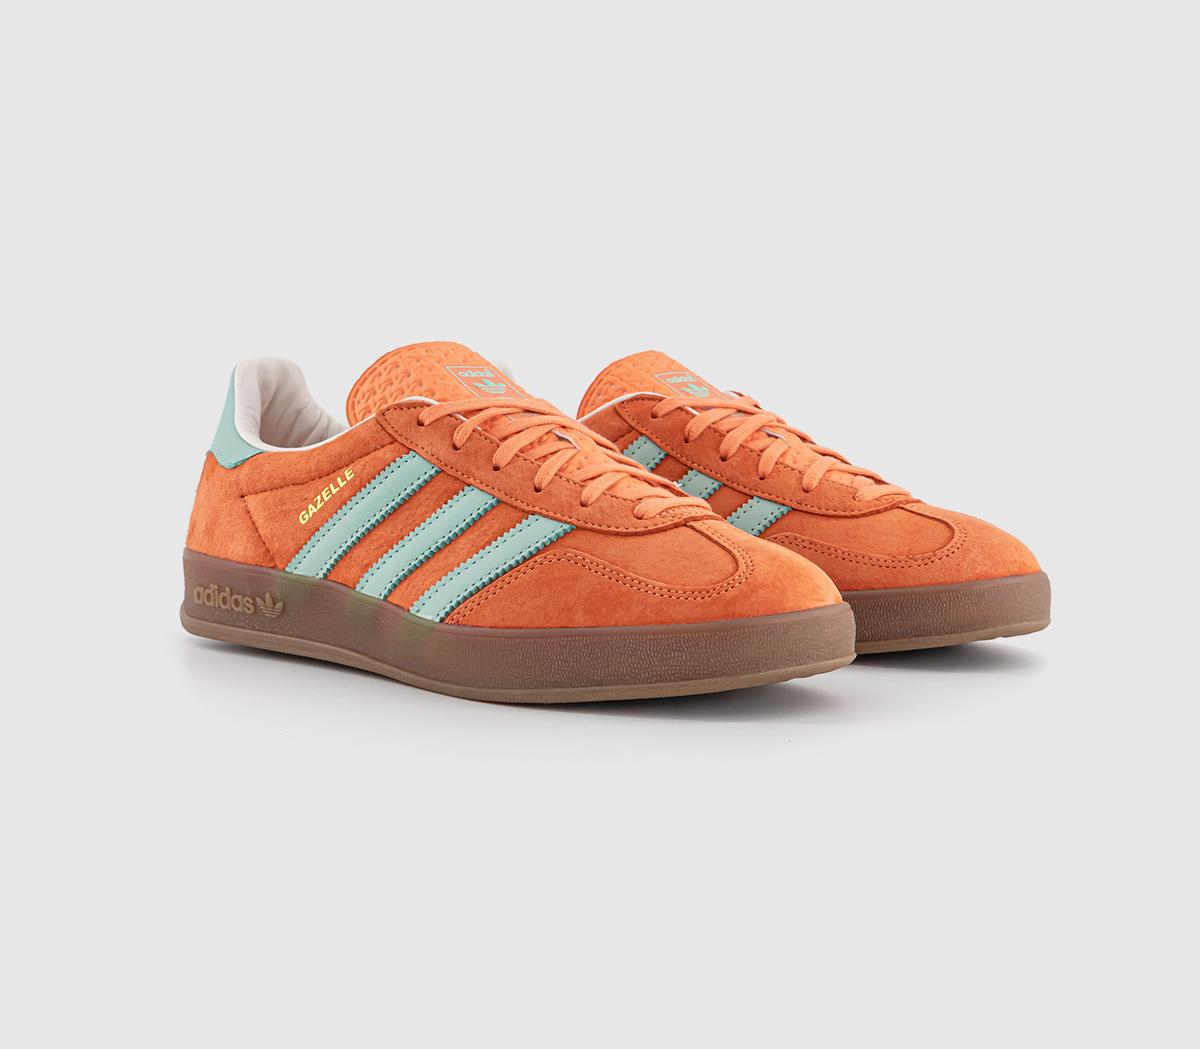 Adidas Gazelle Indoor Trainers Easy Orange Clear Mint Gum Red, 11